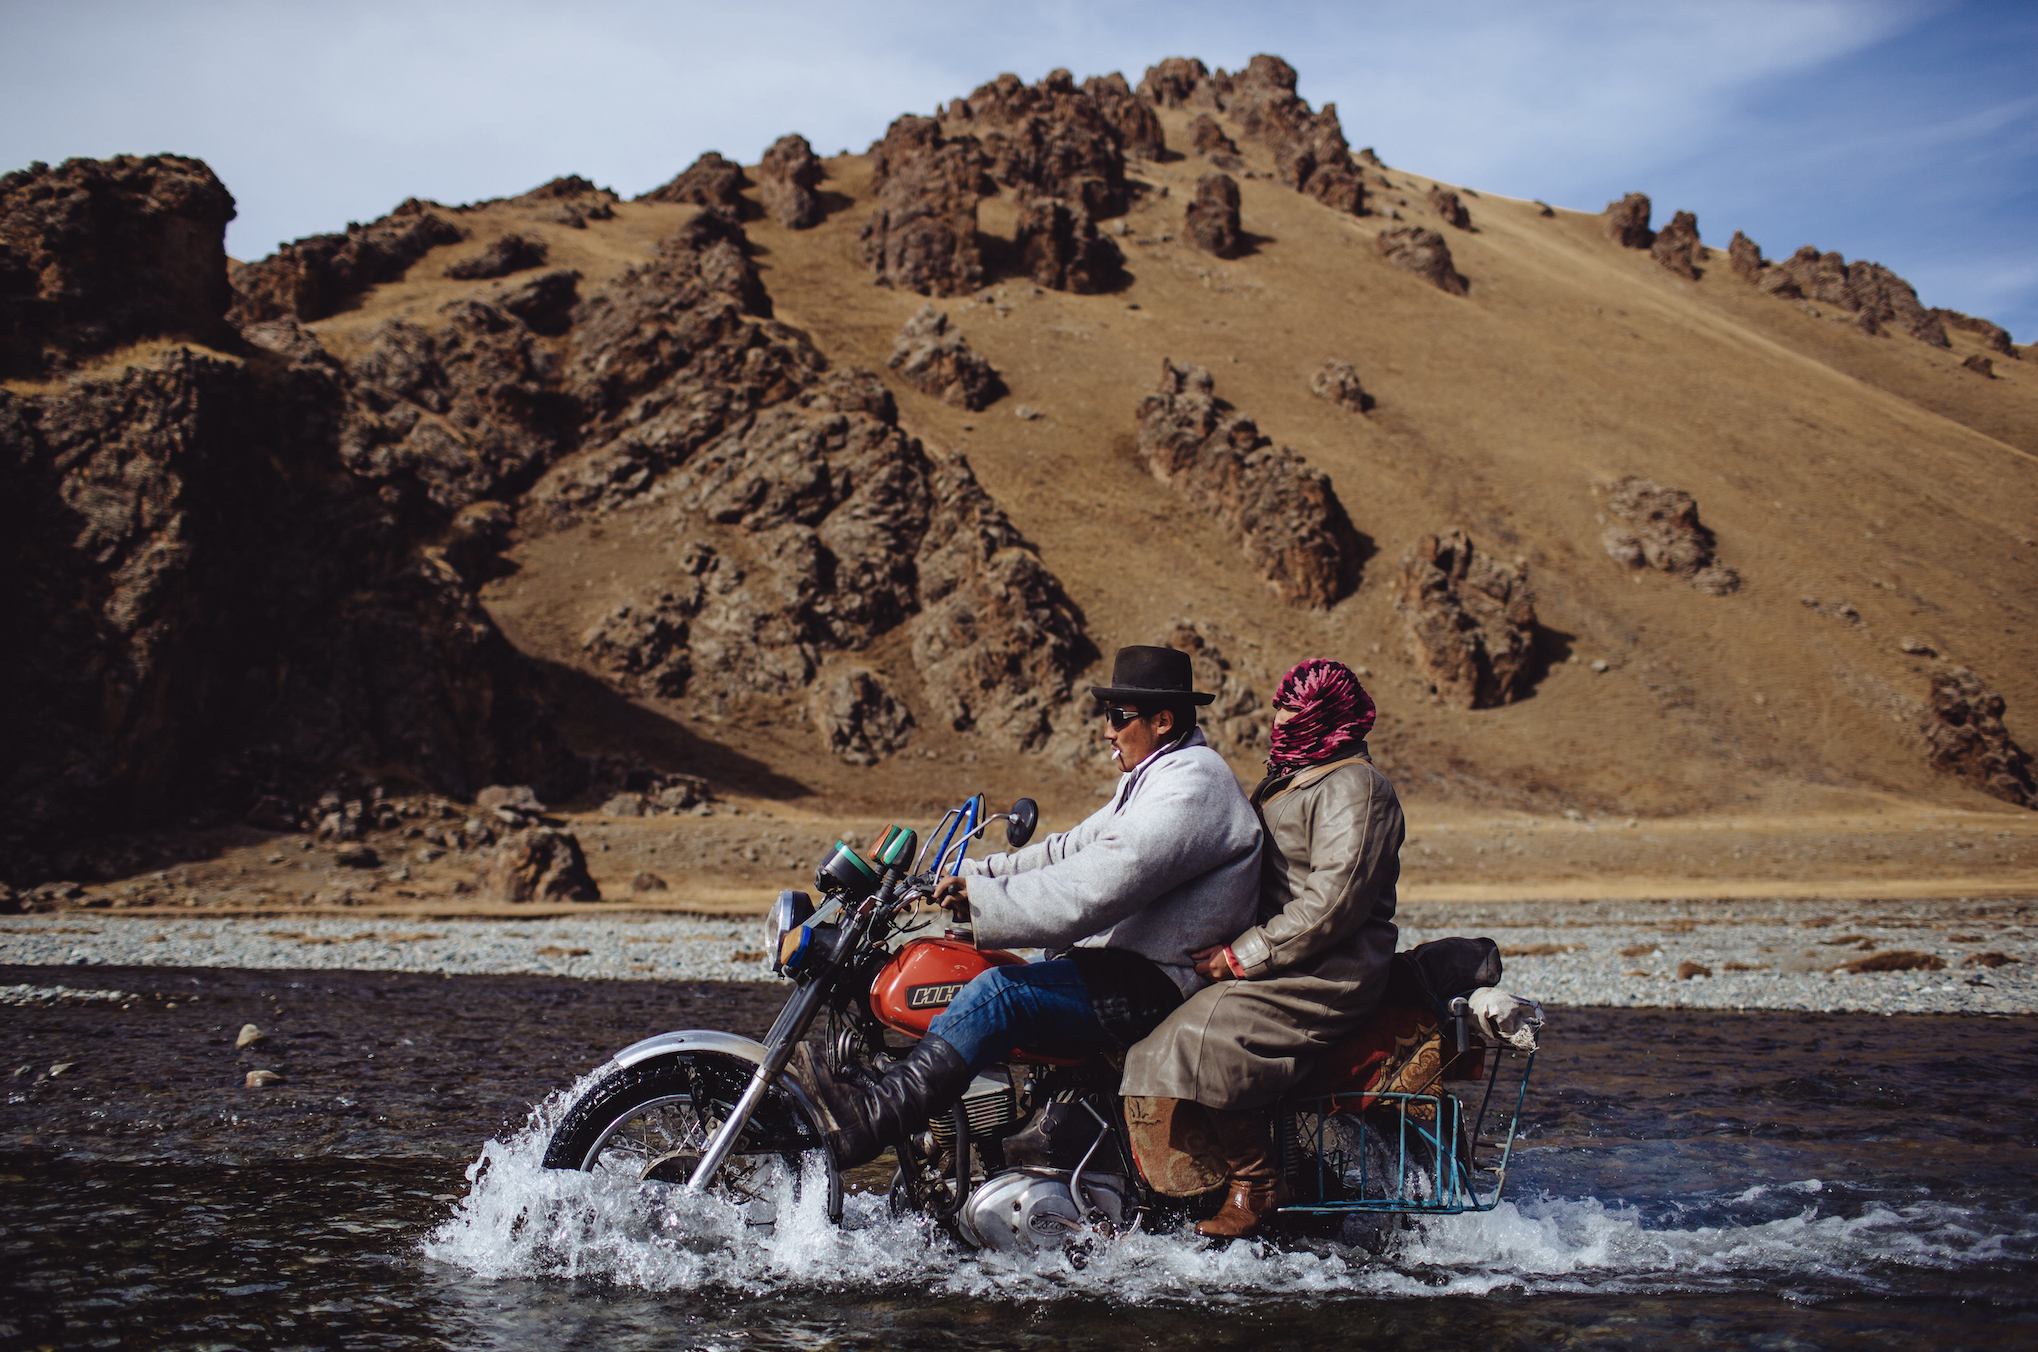 "Couple Crossing a Creek Riding a Russian Classic IZH Motorcycle  in the Khaingain Nuruu National Park 50km North of Erdenetsogt, Mongolia" 